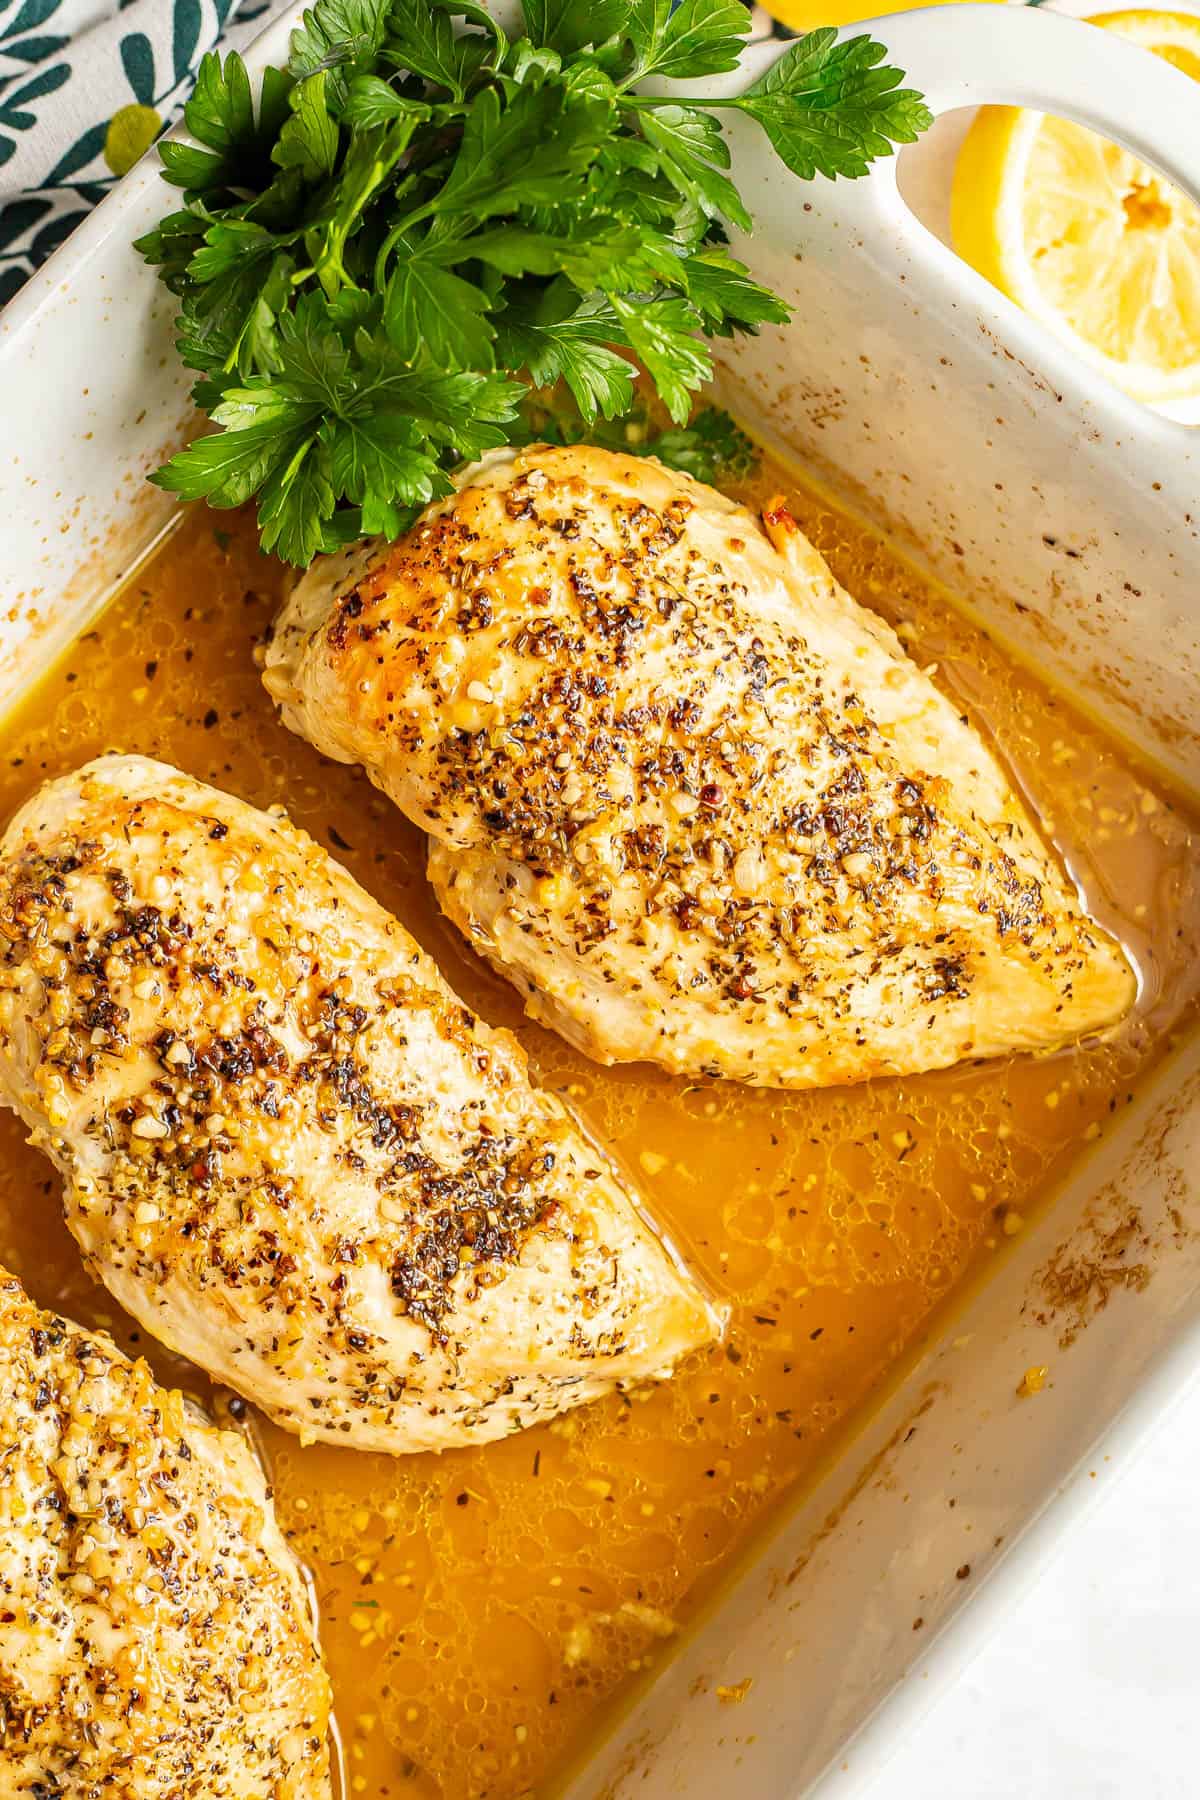 Three seasoned and seared chicken breasts in a white casserole dish with a lemony sauce and sprigs of parsley tucked to the side.